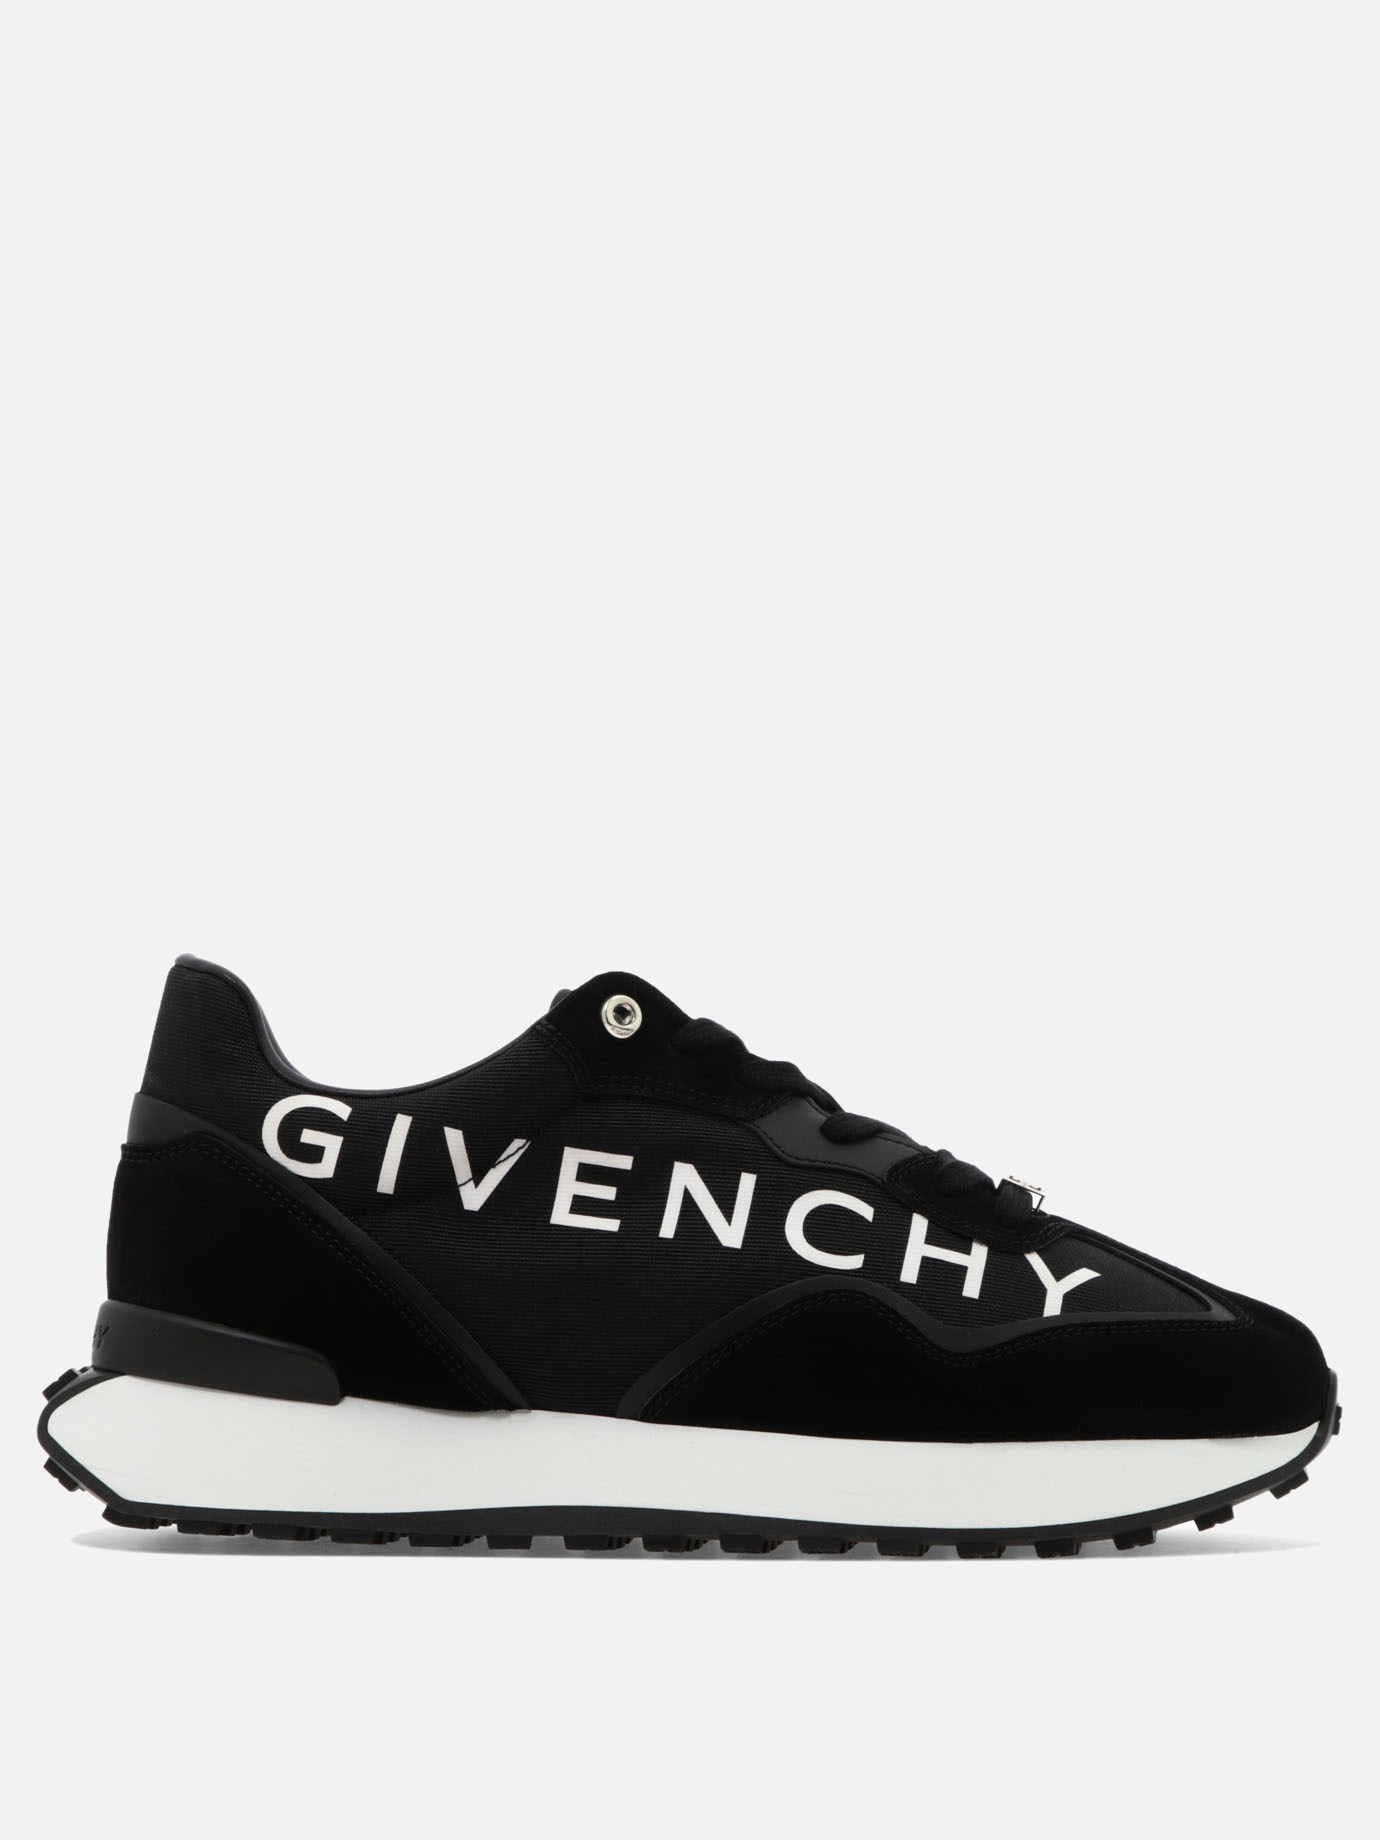  GIV Runner  sneakersby Givenchy - 1